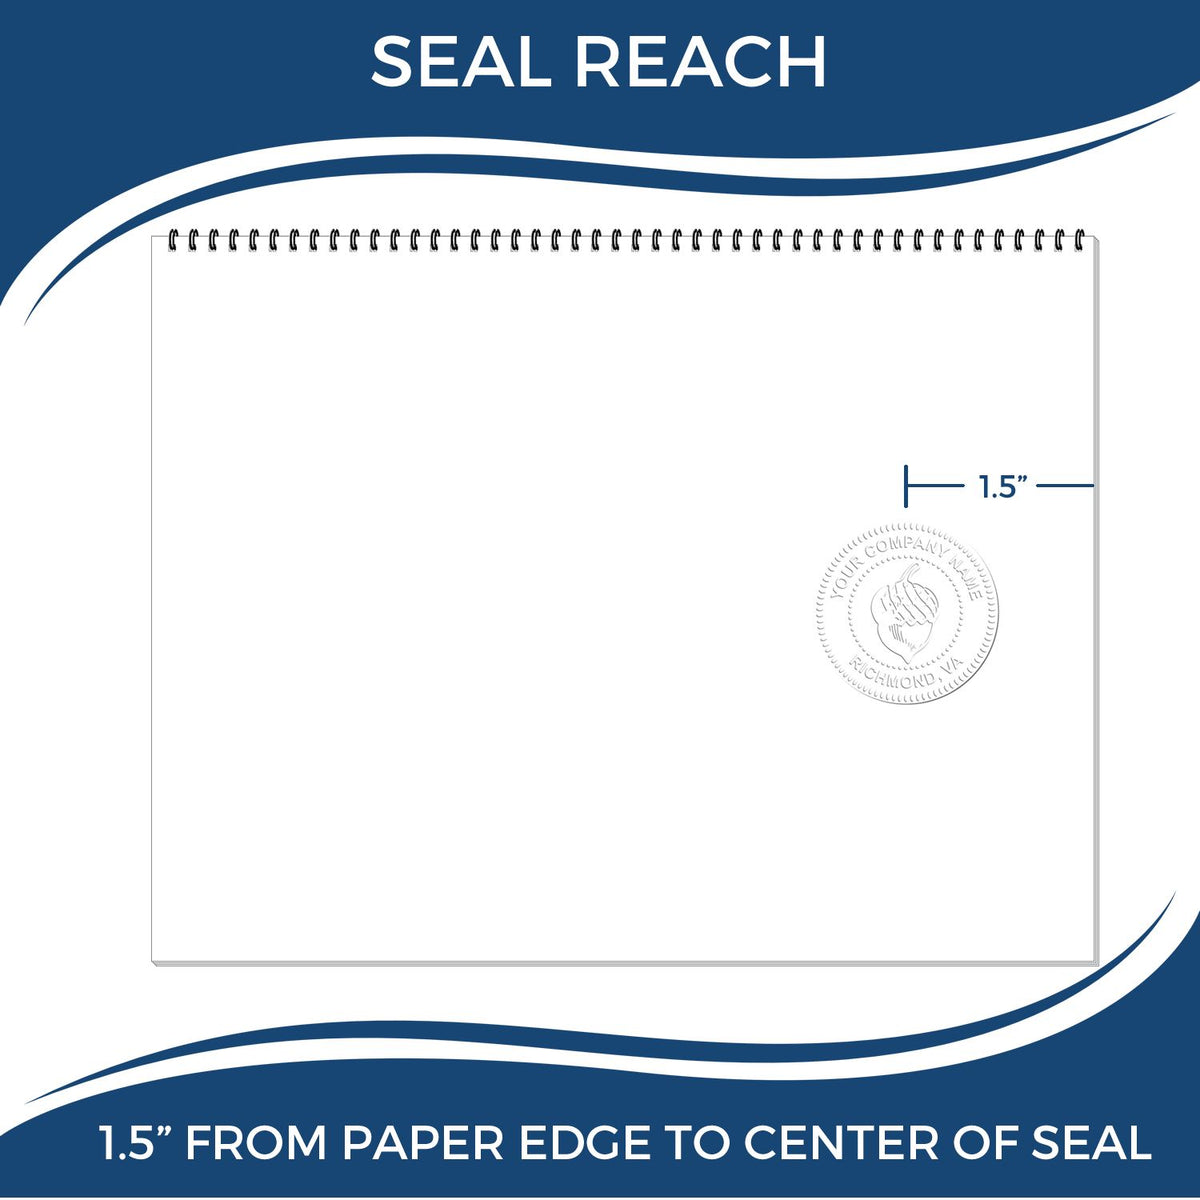 An infographic showing the seal reach which is represented by a ruler and a miniature seal image of the Hybrid Louisiana Geologist Seal